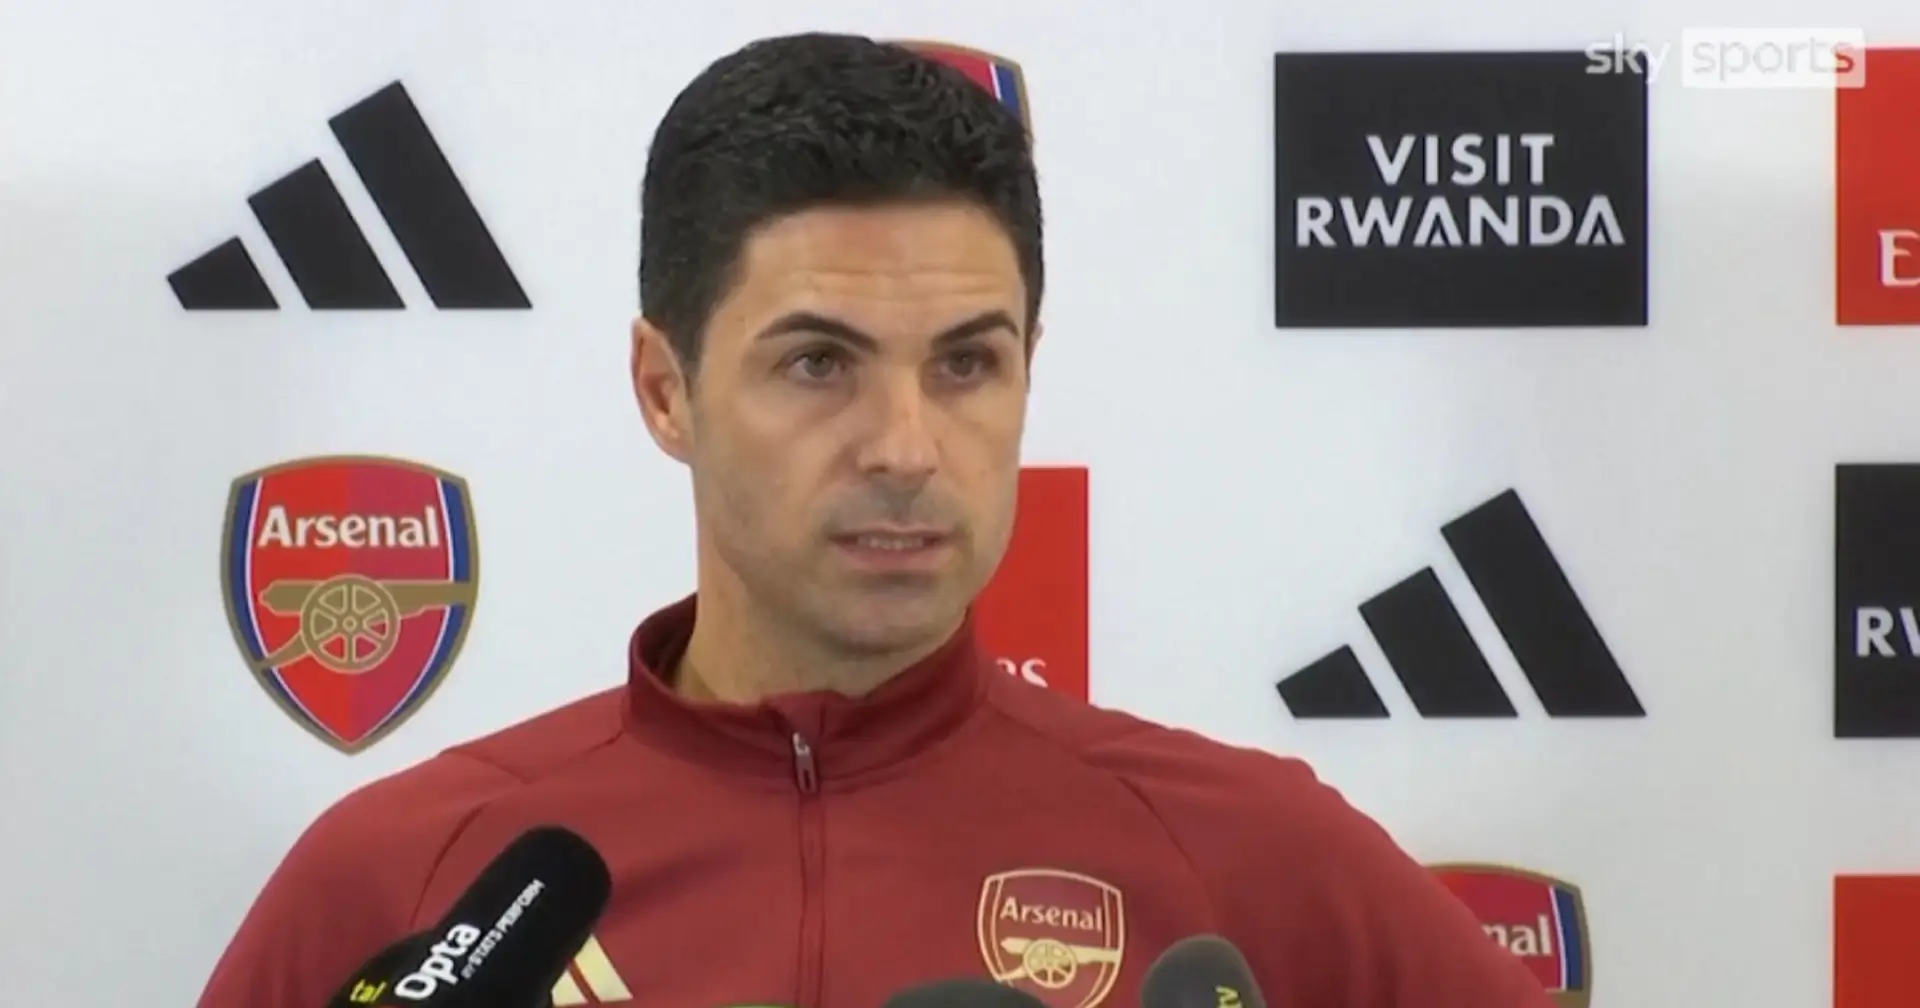 'We are all in this together': Mikel Arteta reveals Premier League managers agree with his referee criticism